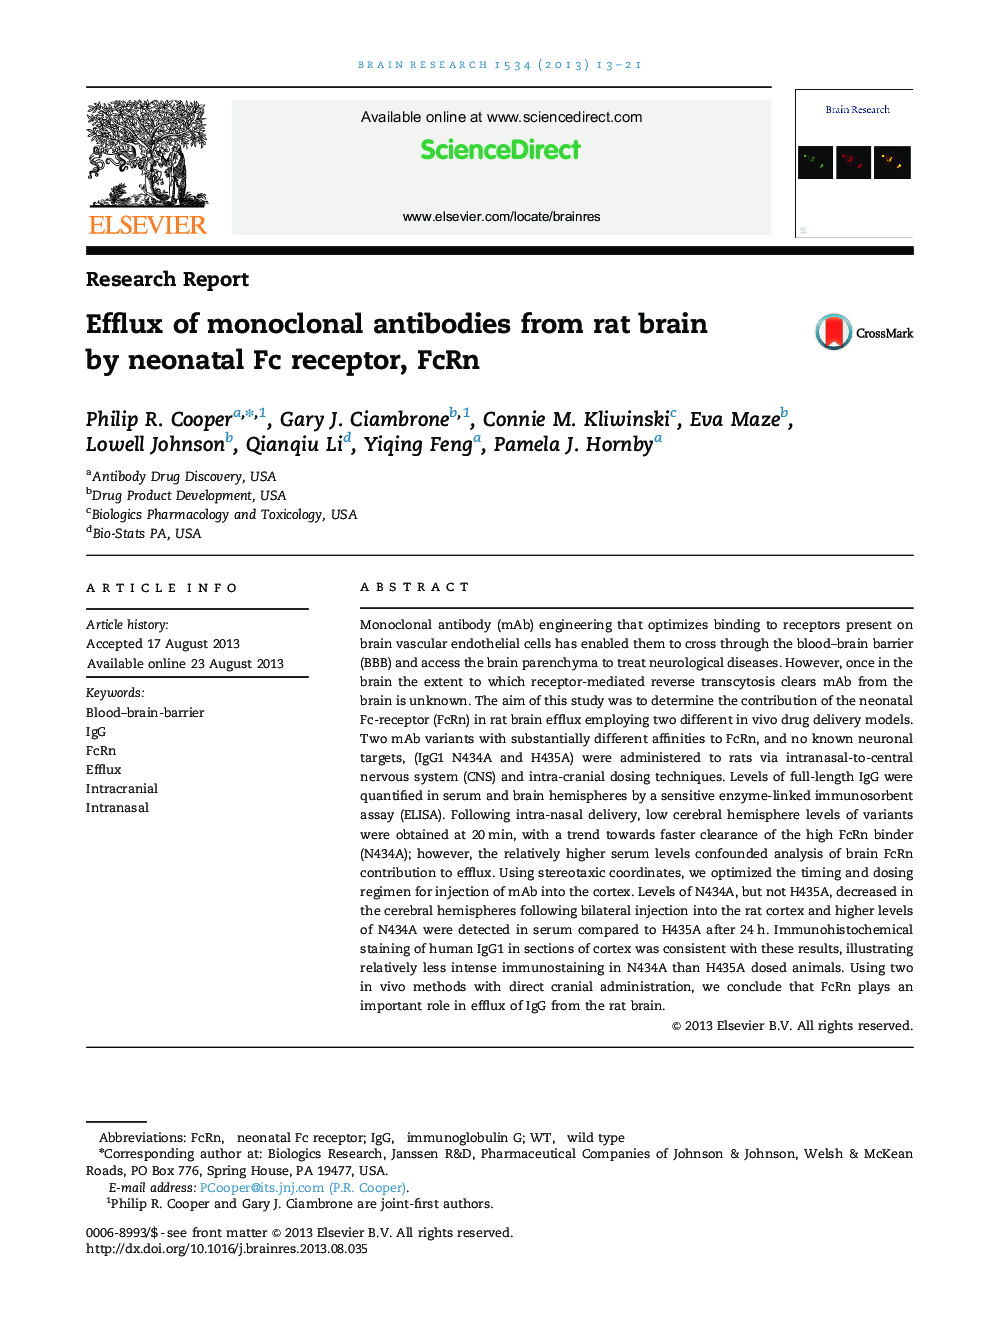 Research ReportEfflux of monoclonal antibodies from rat brain by neonatal Fc receptor, FcRn